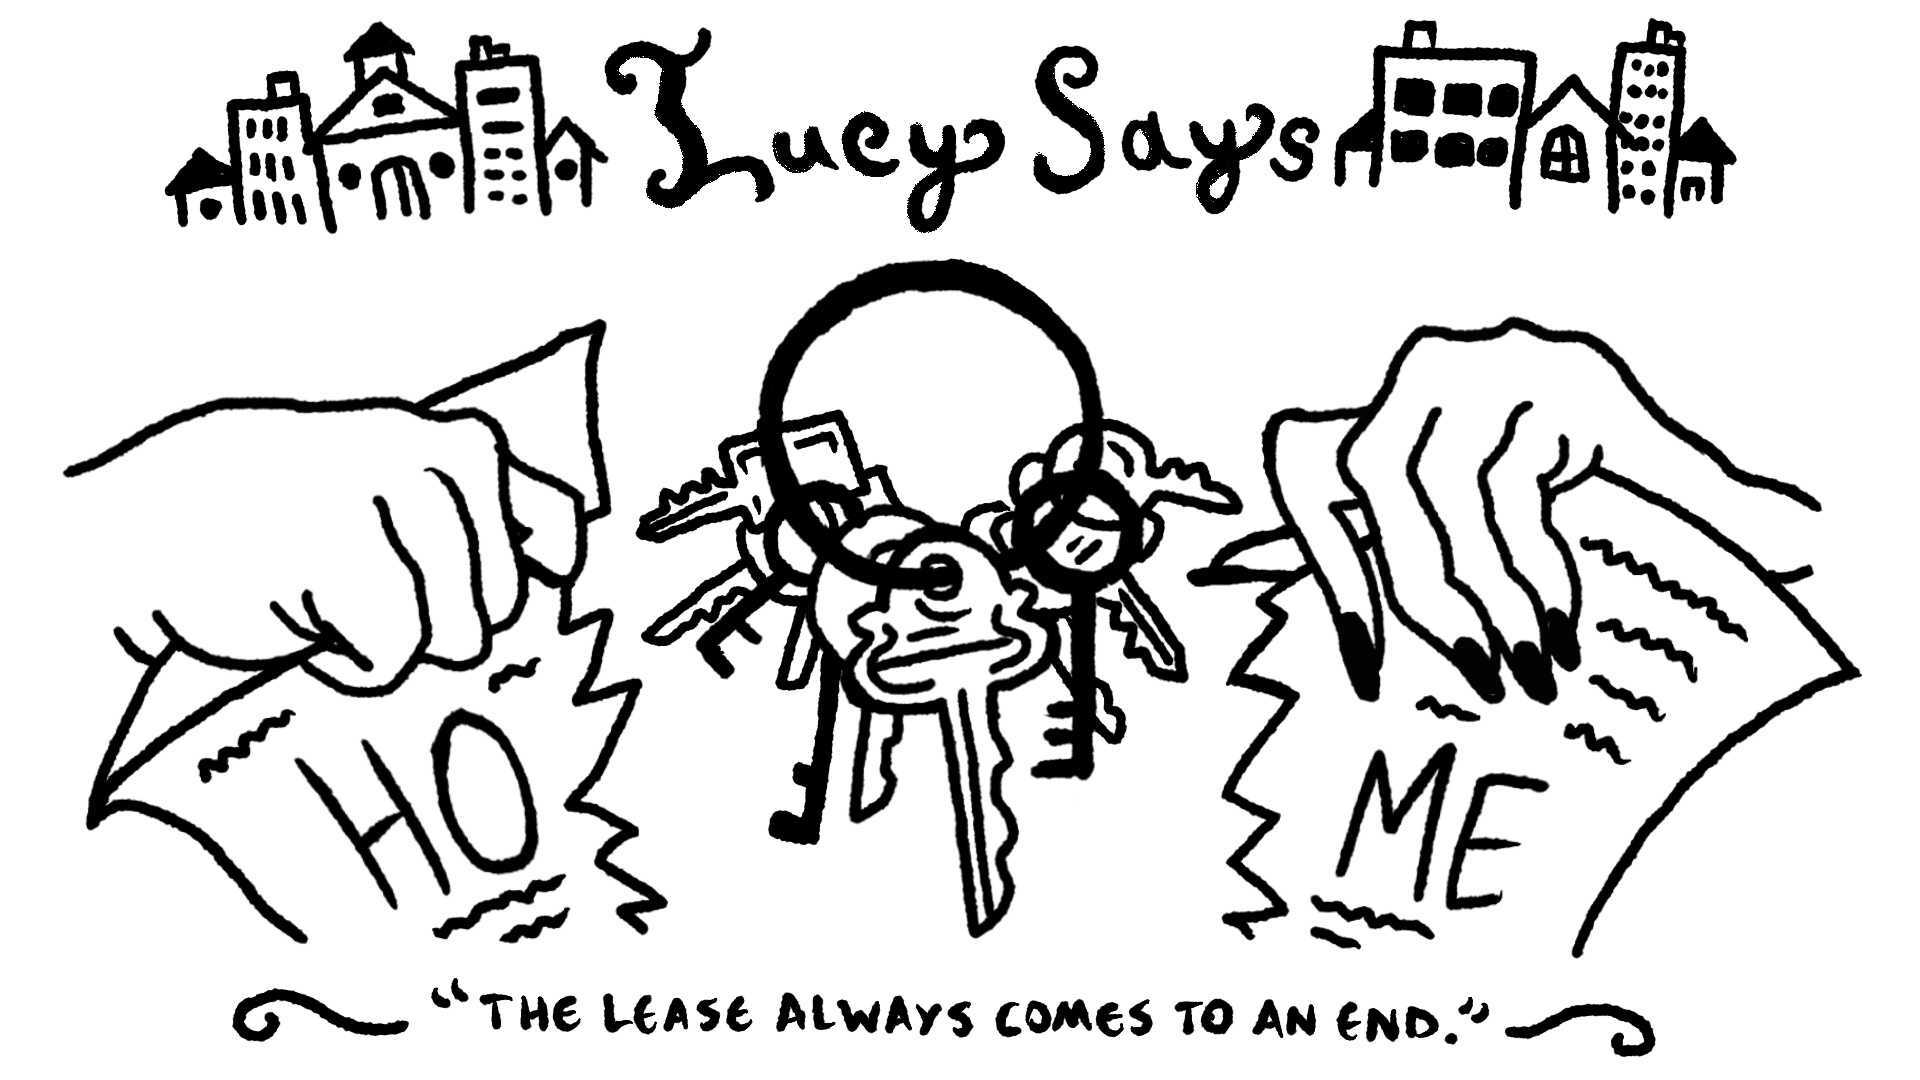 Hands tearing paper that reads “home” with keys in the middle of the torn paper. The top of the illustration reads “Lucy Says” with doodles of homes on each side.